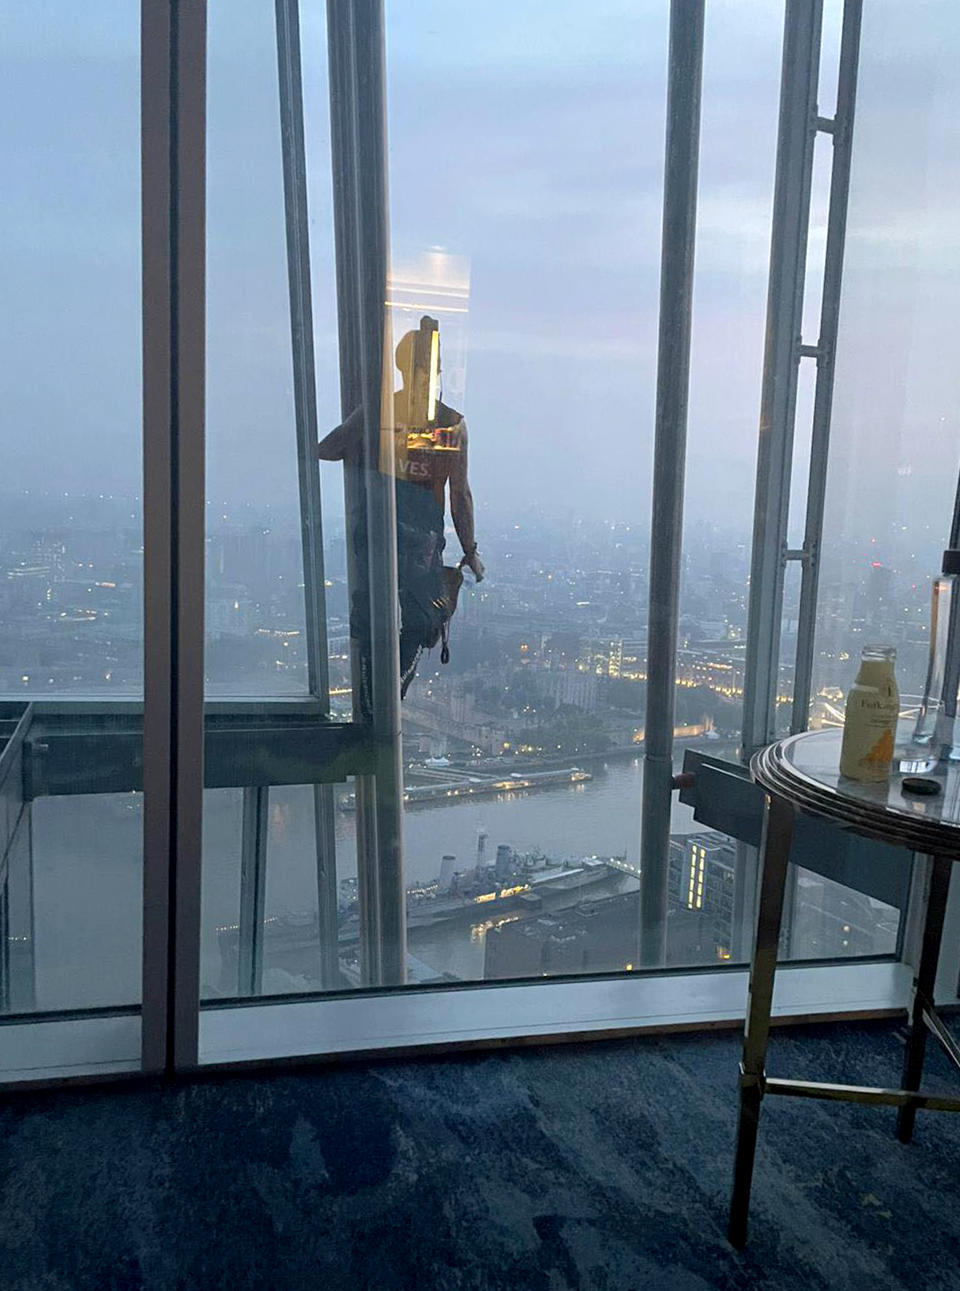 Paul Curphey spotted the climber at 6am as he and his partner lay in bed on the 40th floor of The Shard. (PA)